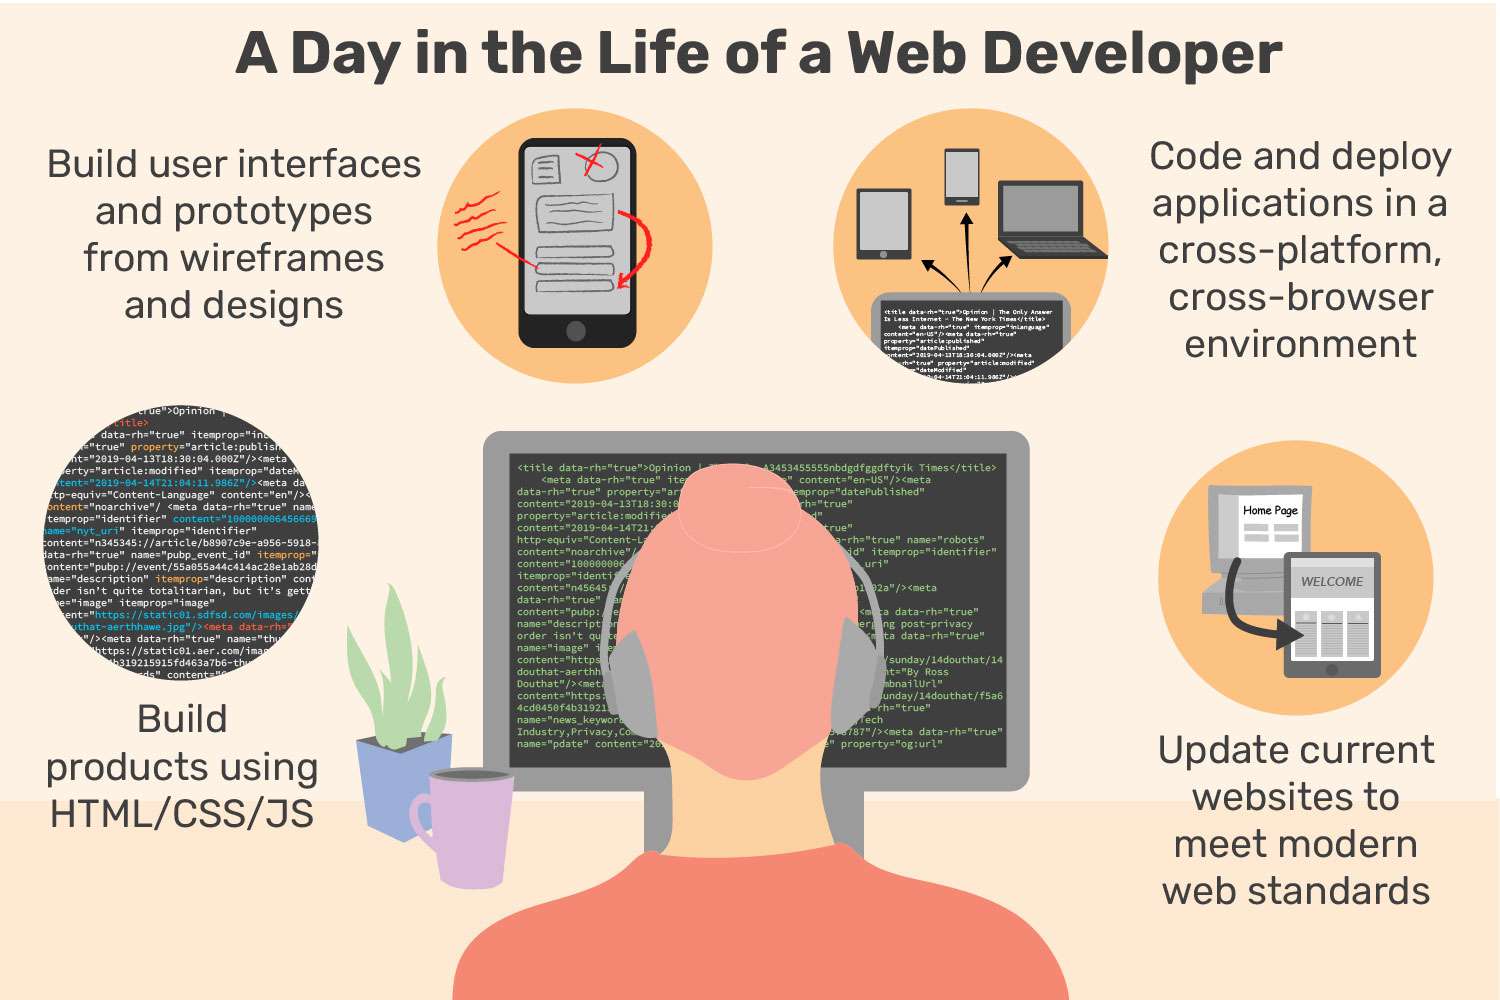 Is there a lack of web developers?